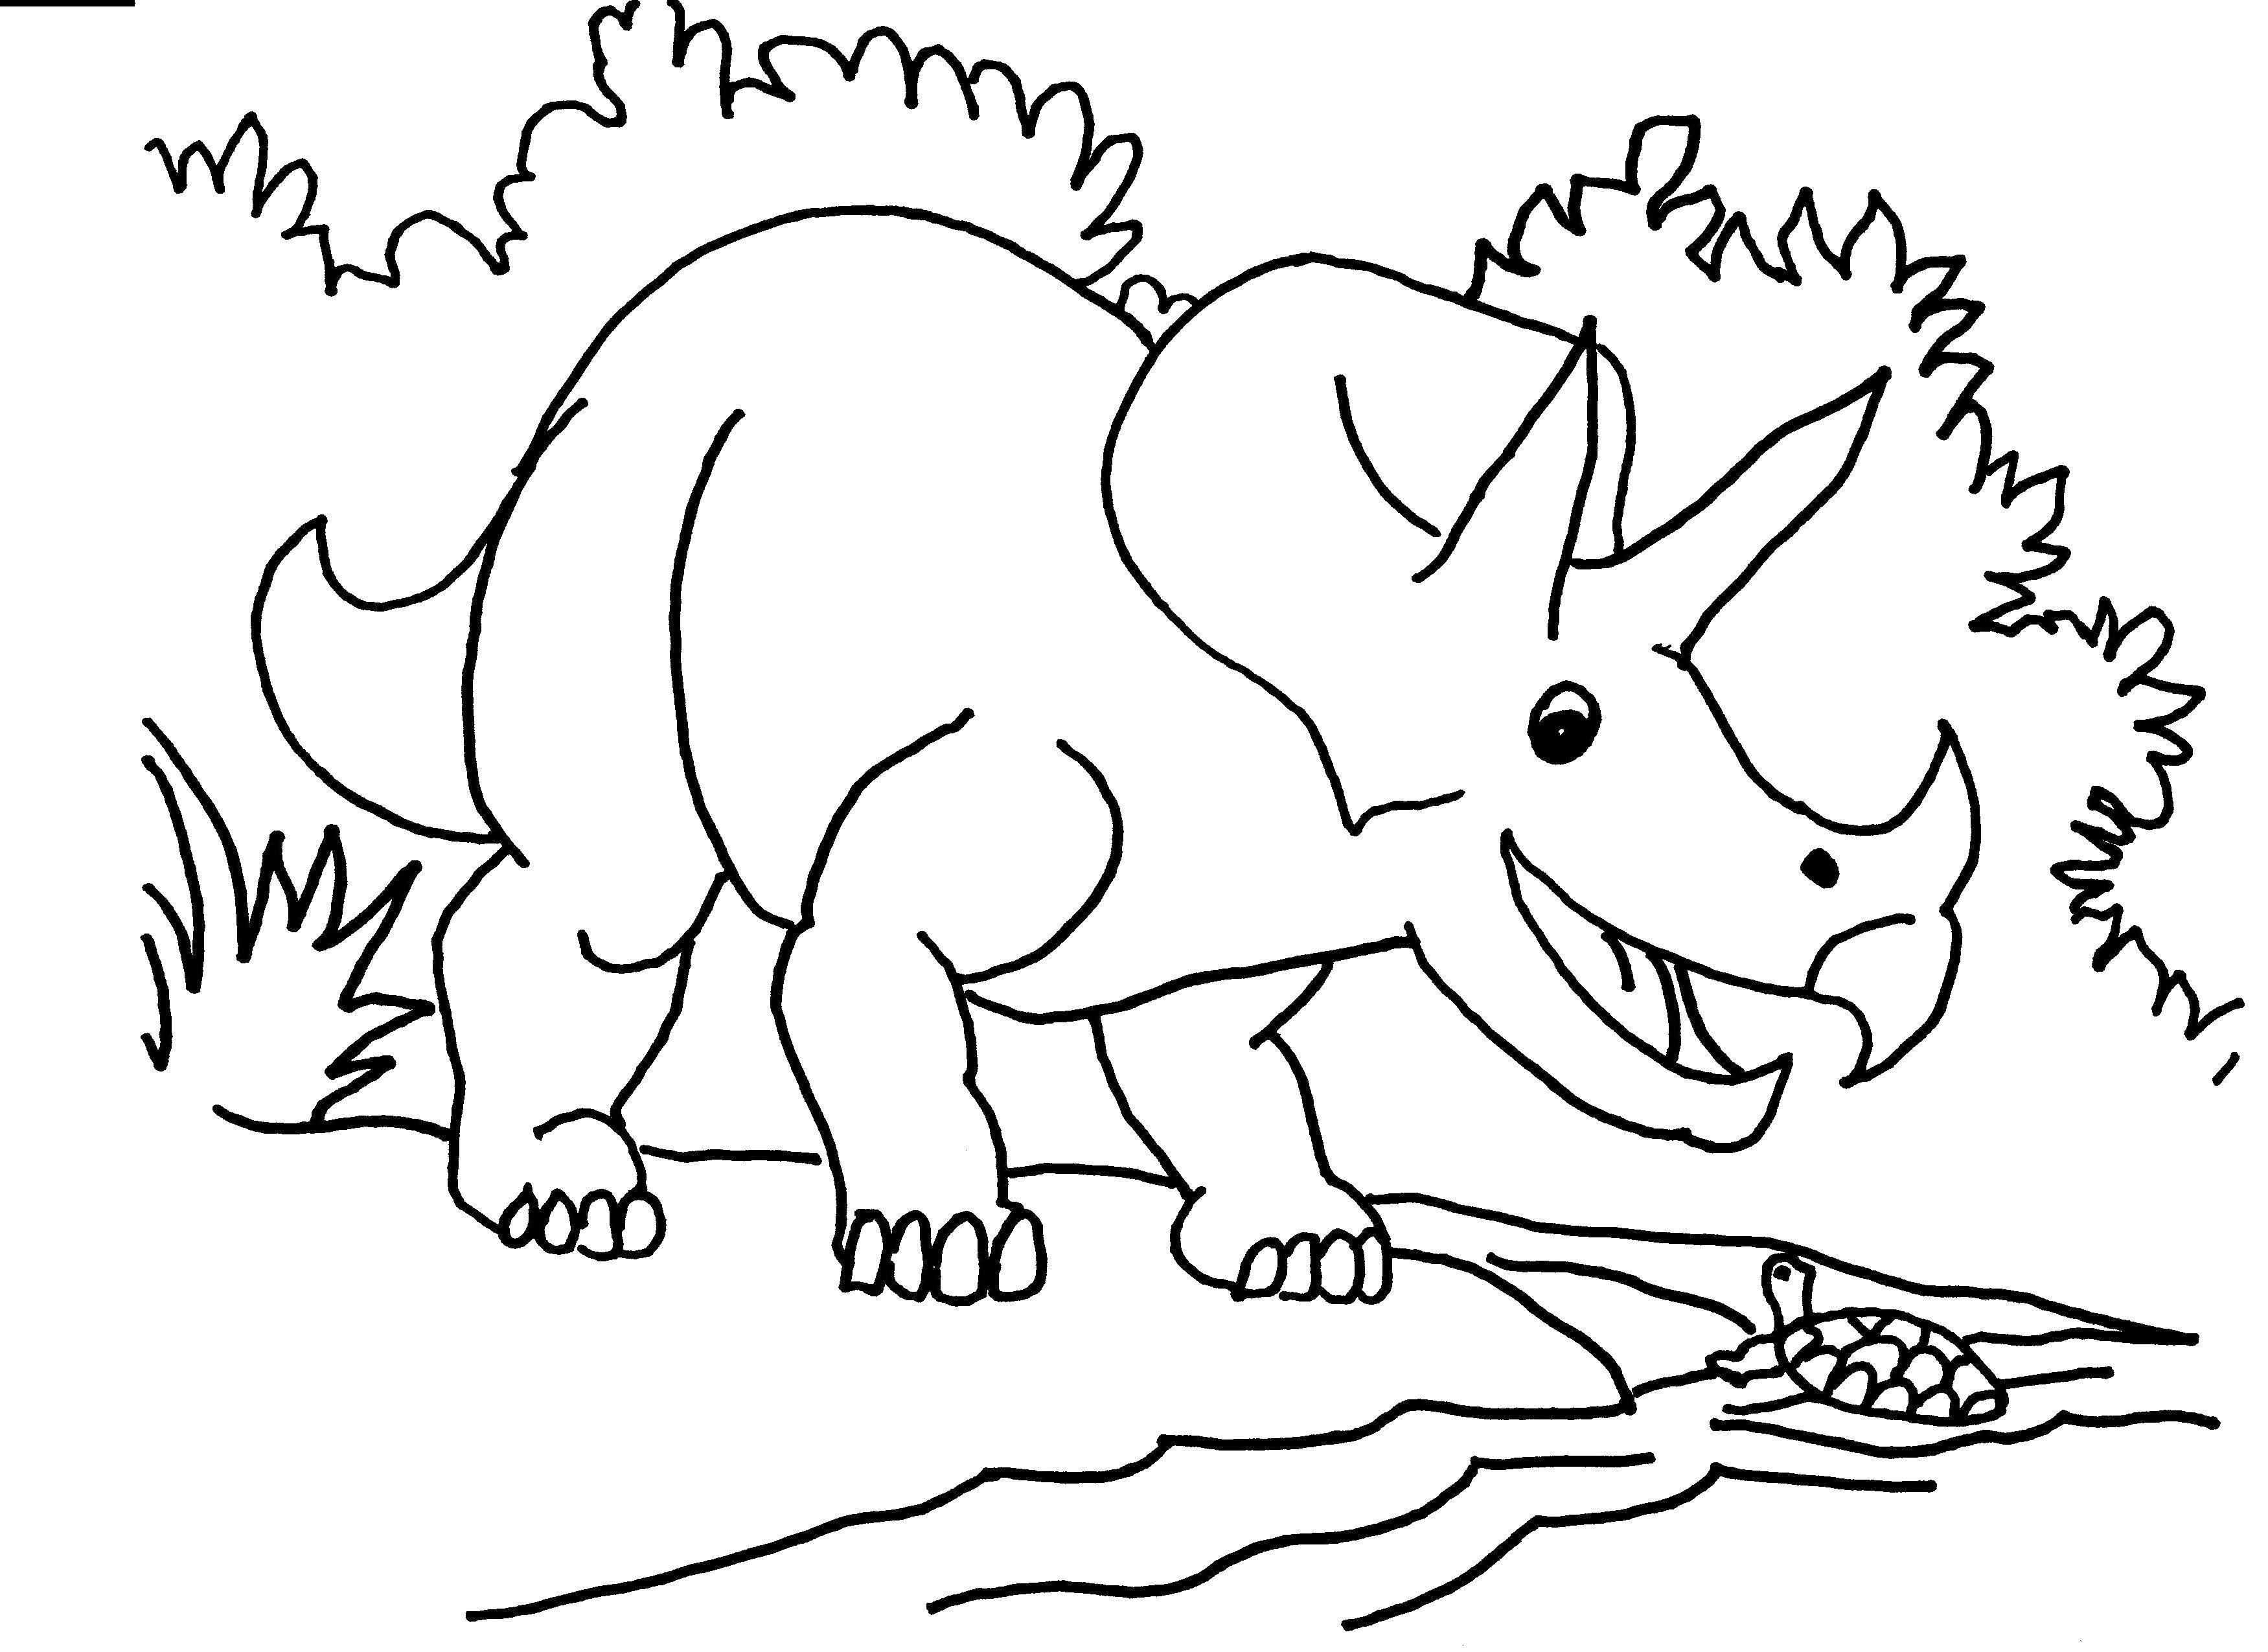 Coloring Triceraptor with a turtle. Category dinosaur. Tags:  Triceratops, dinosaur.